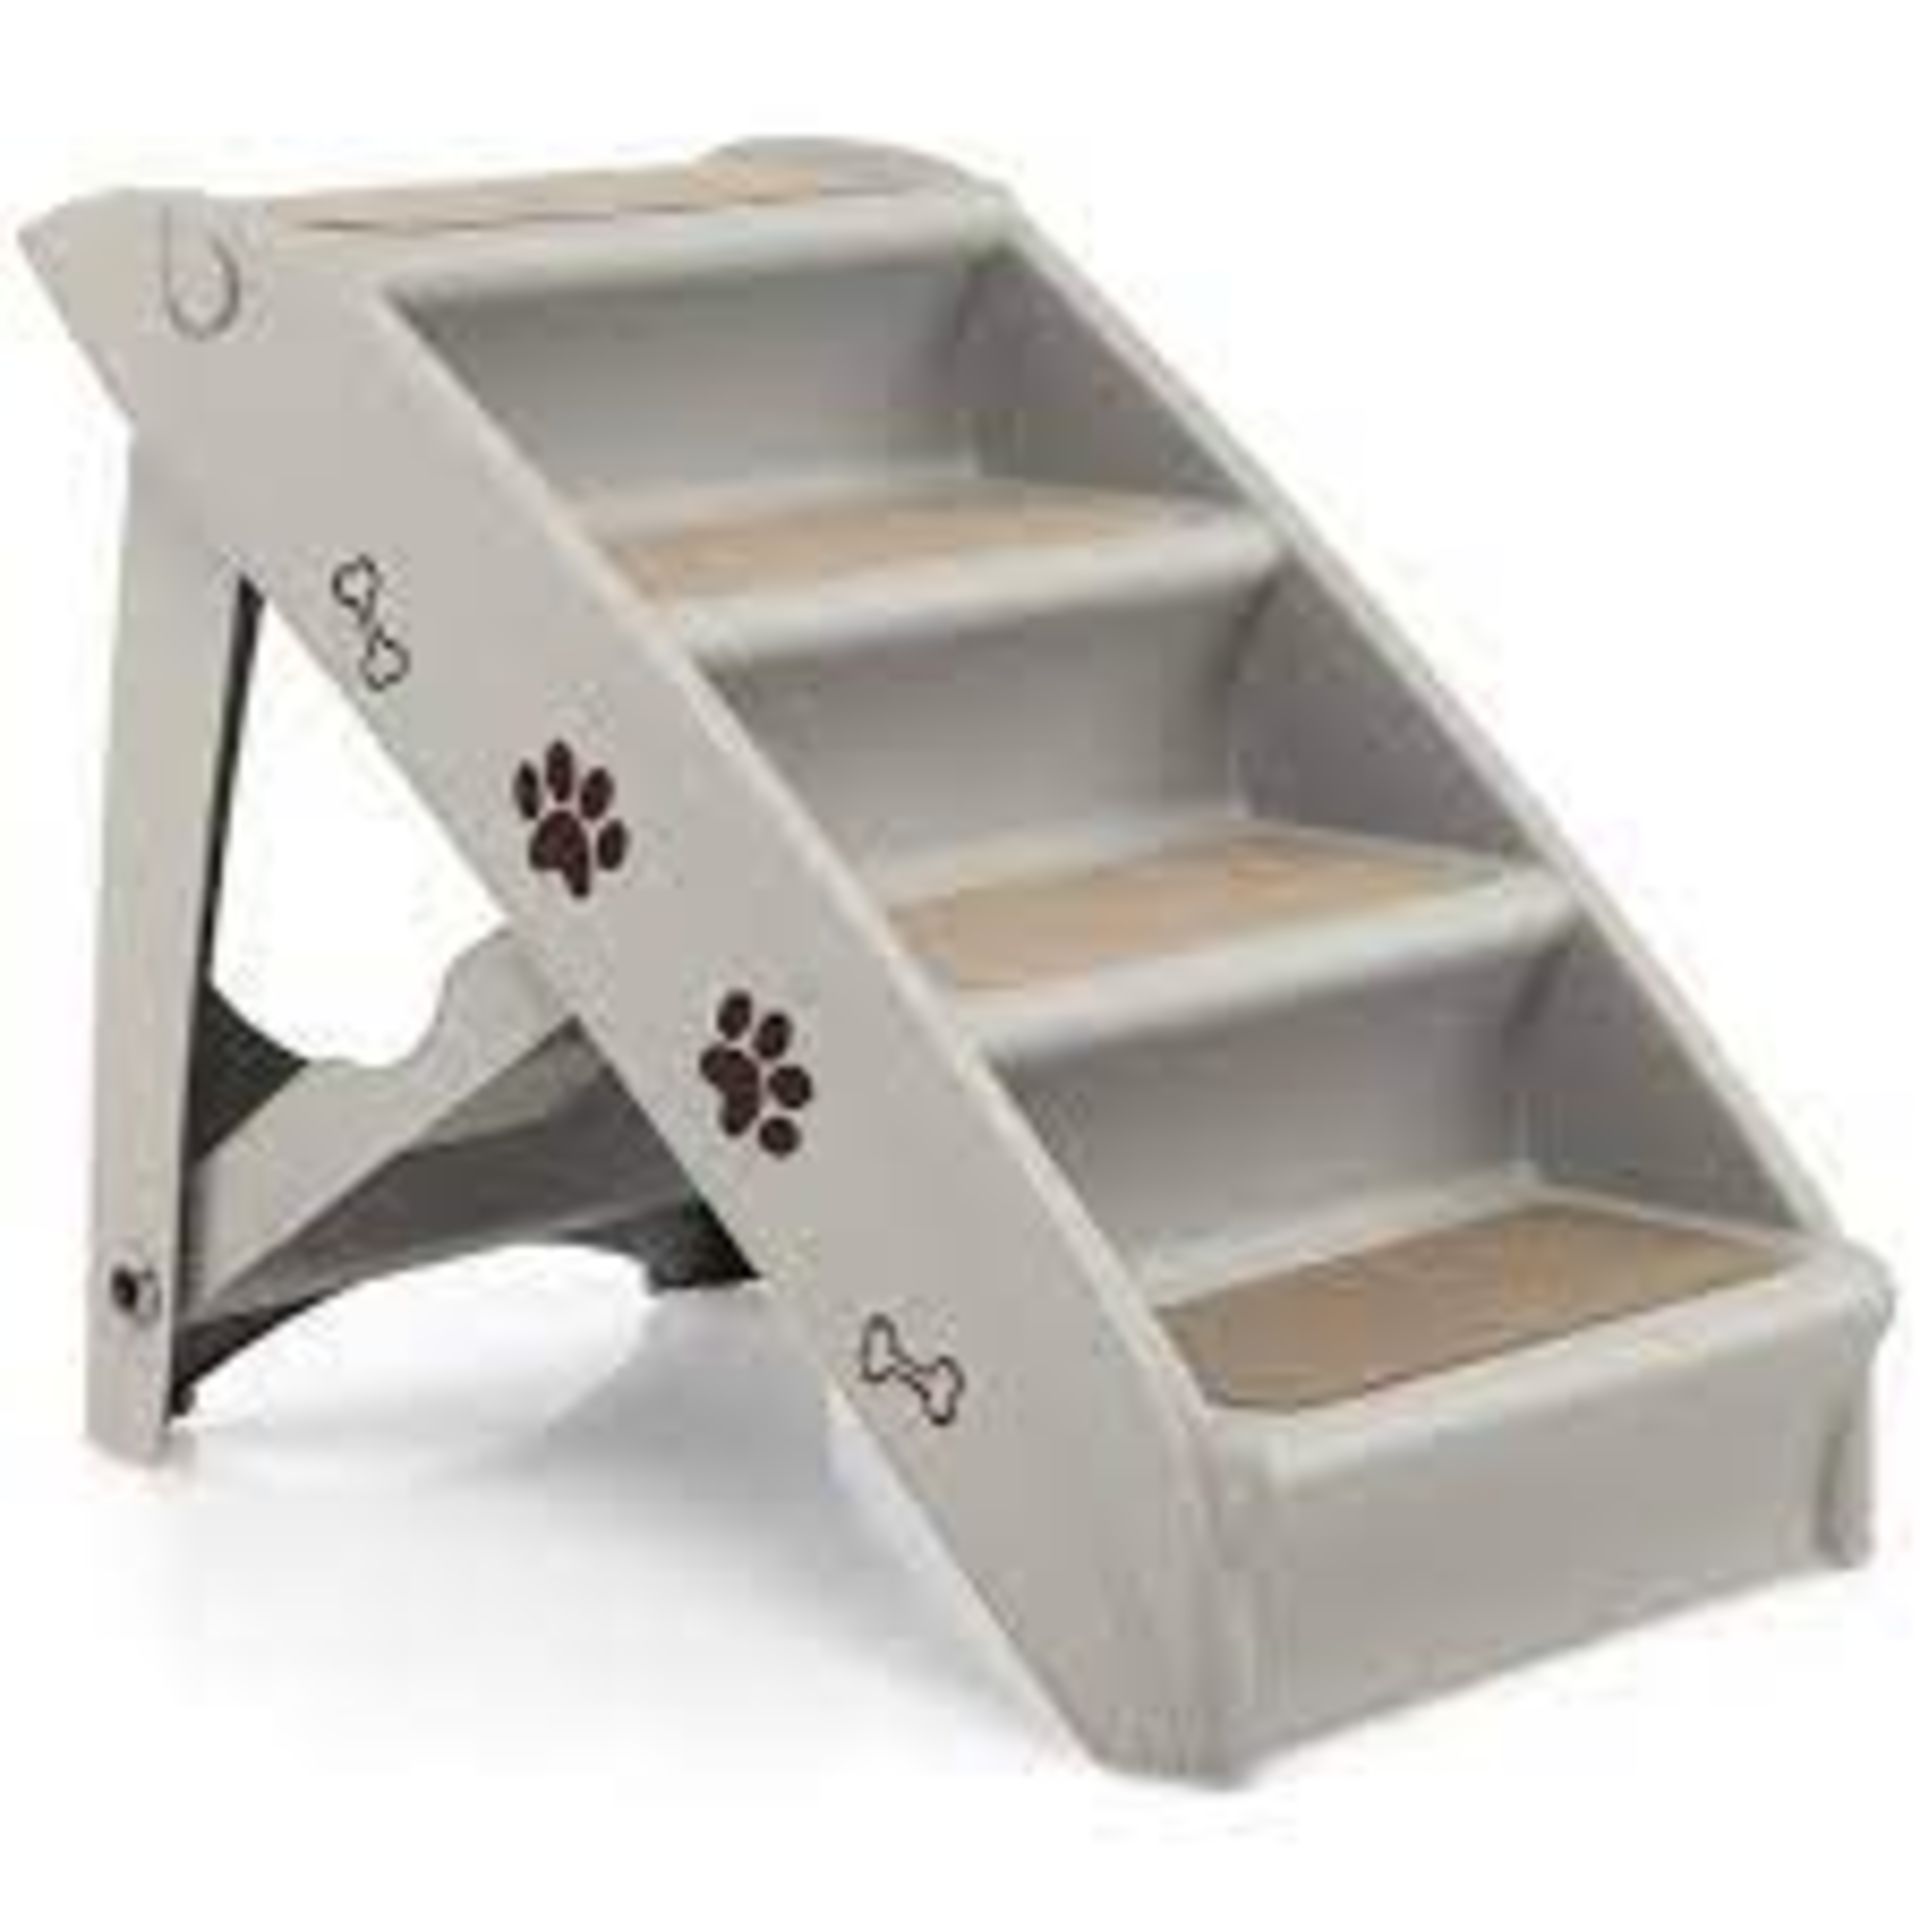 4 Steps Folding Pet Stairs With Safe Side Rail-Gray - ER53